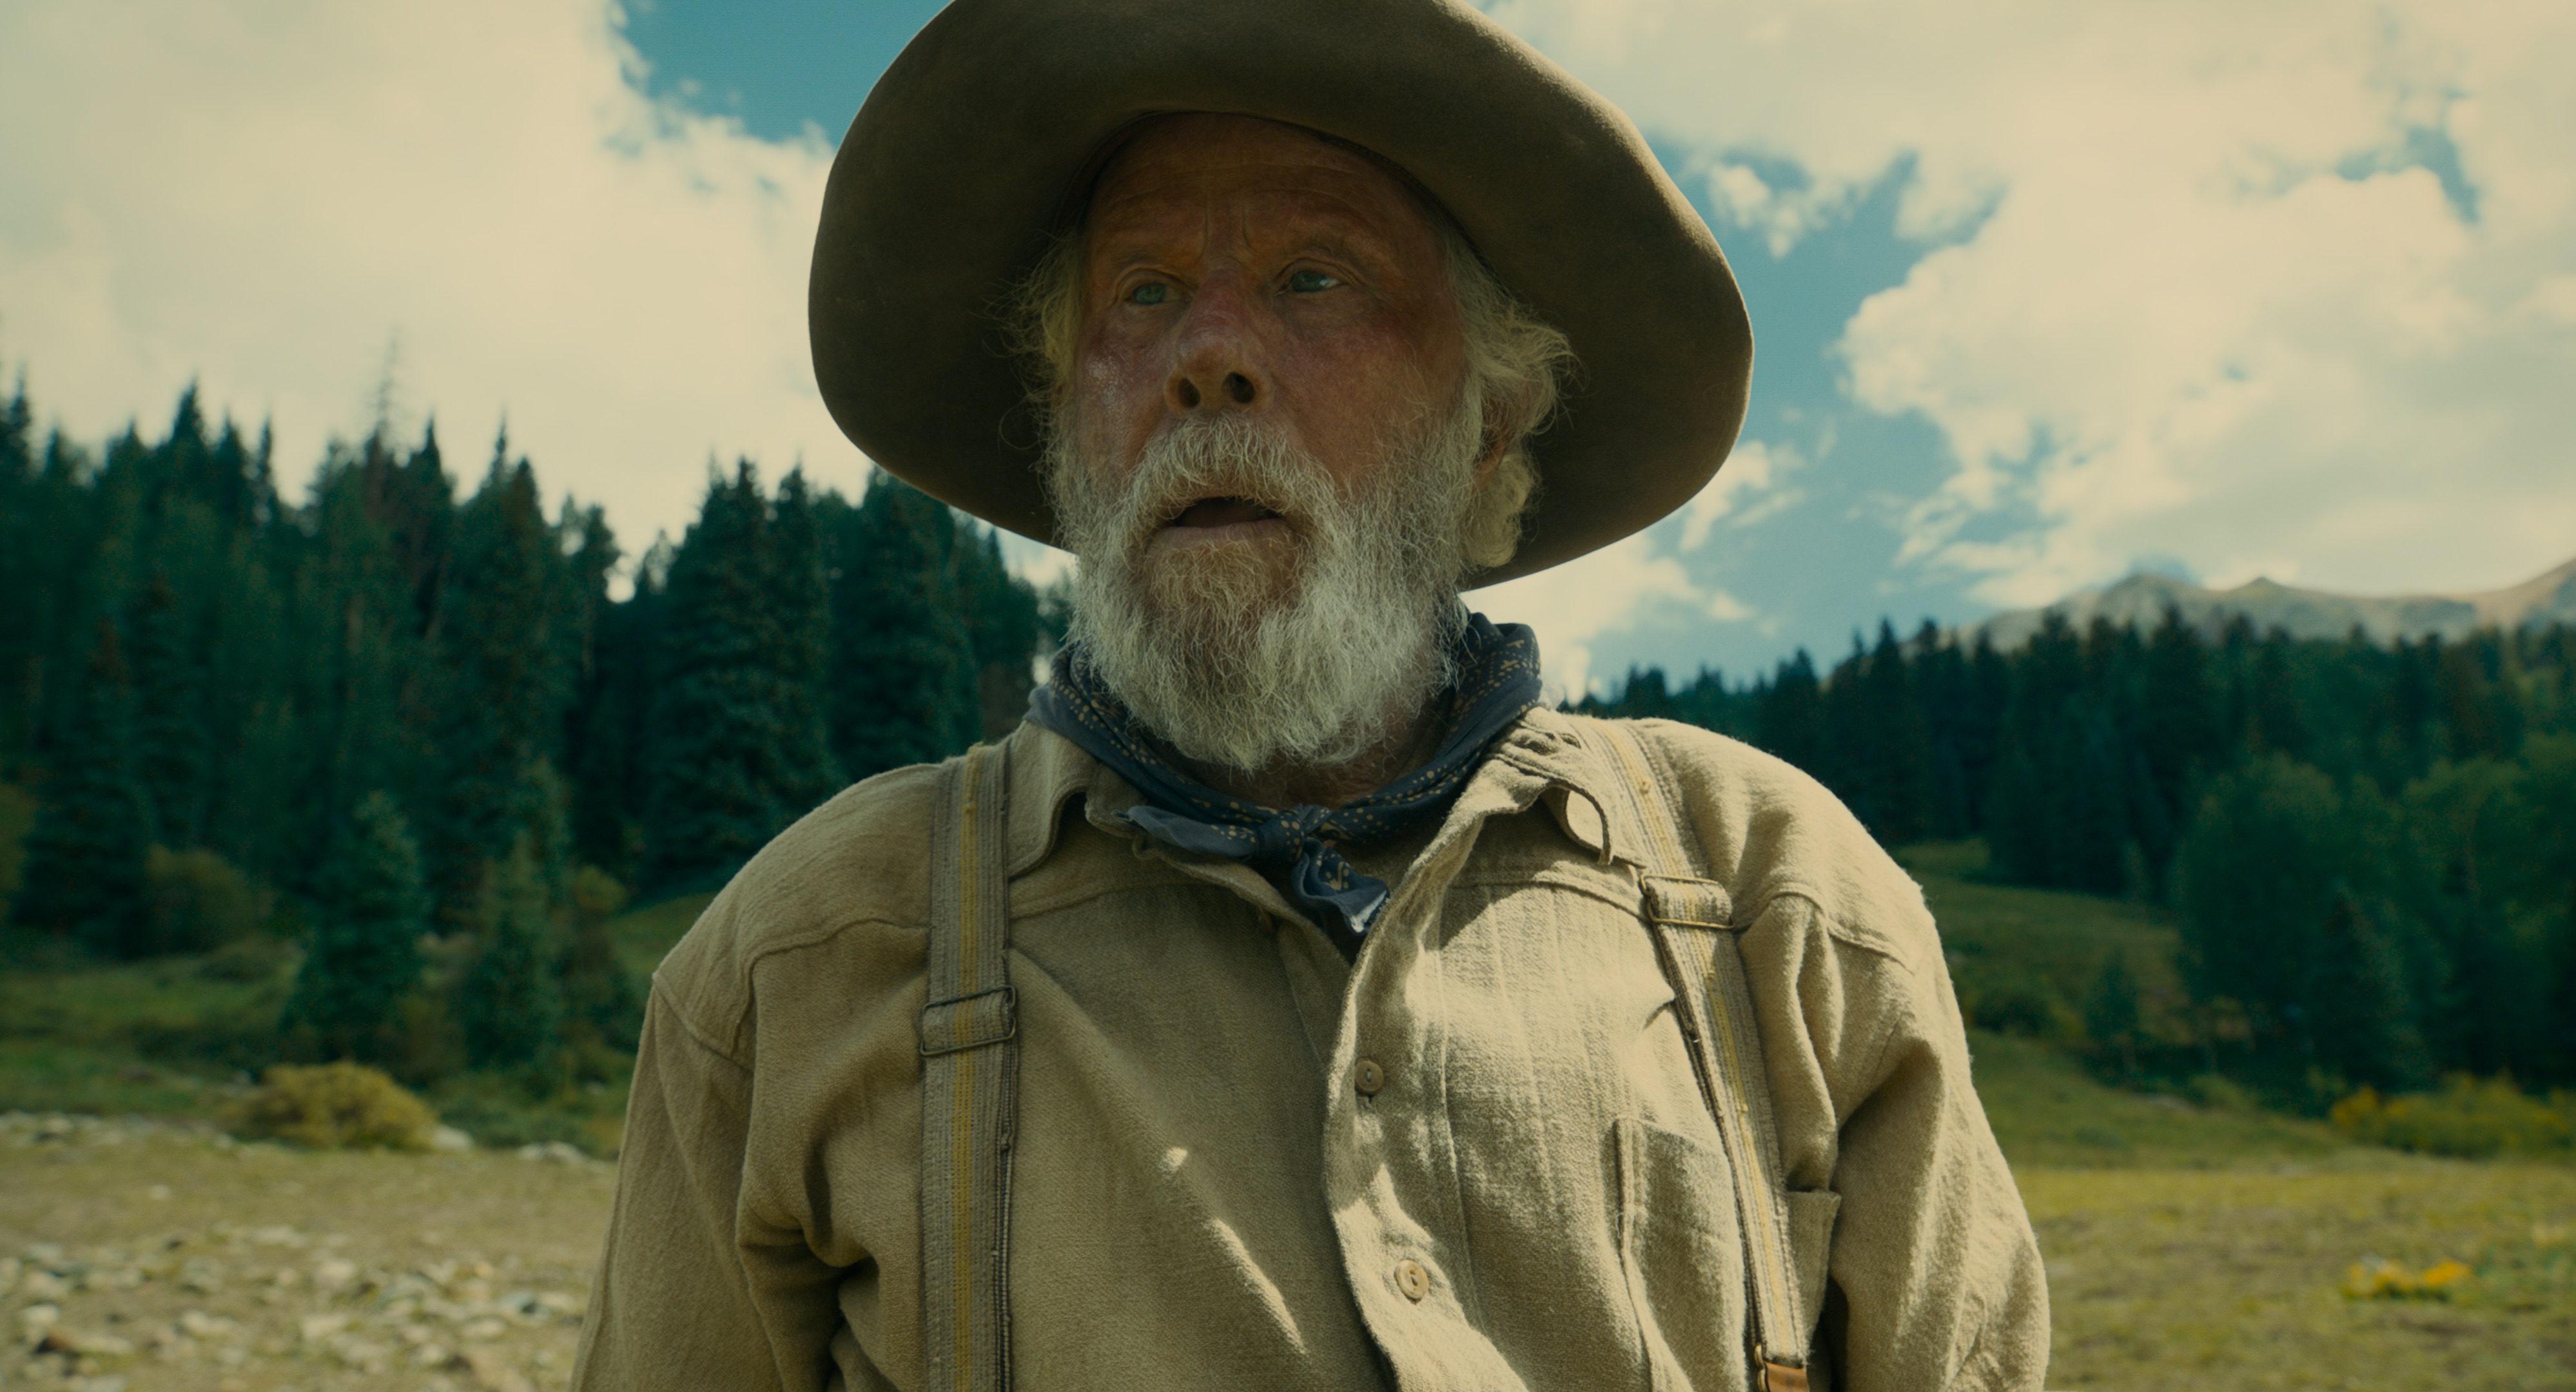 The Ballad of Buster Scruggs Is as Open and Thrilling as the Old